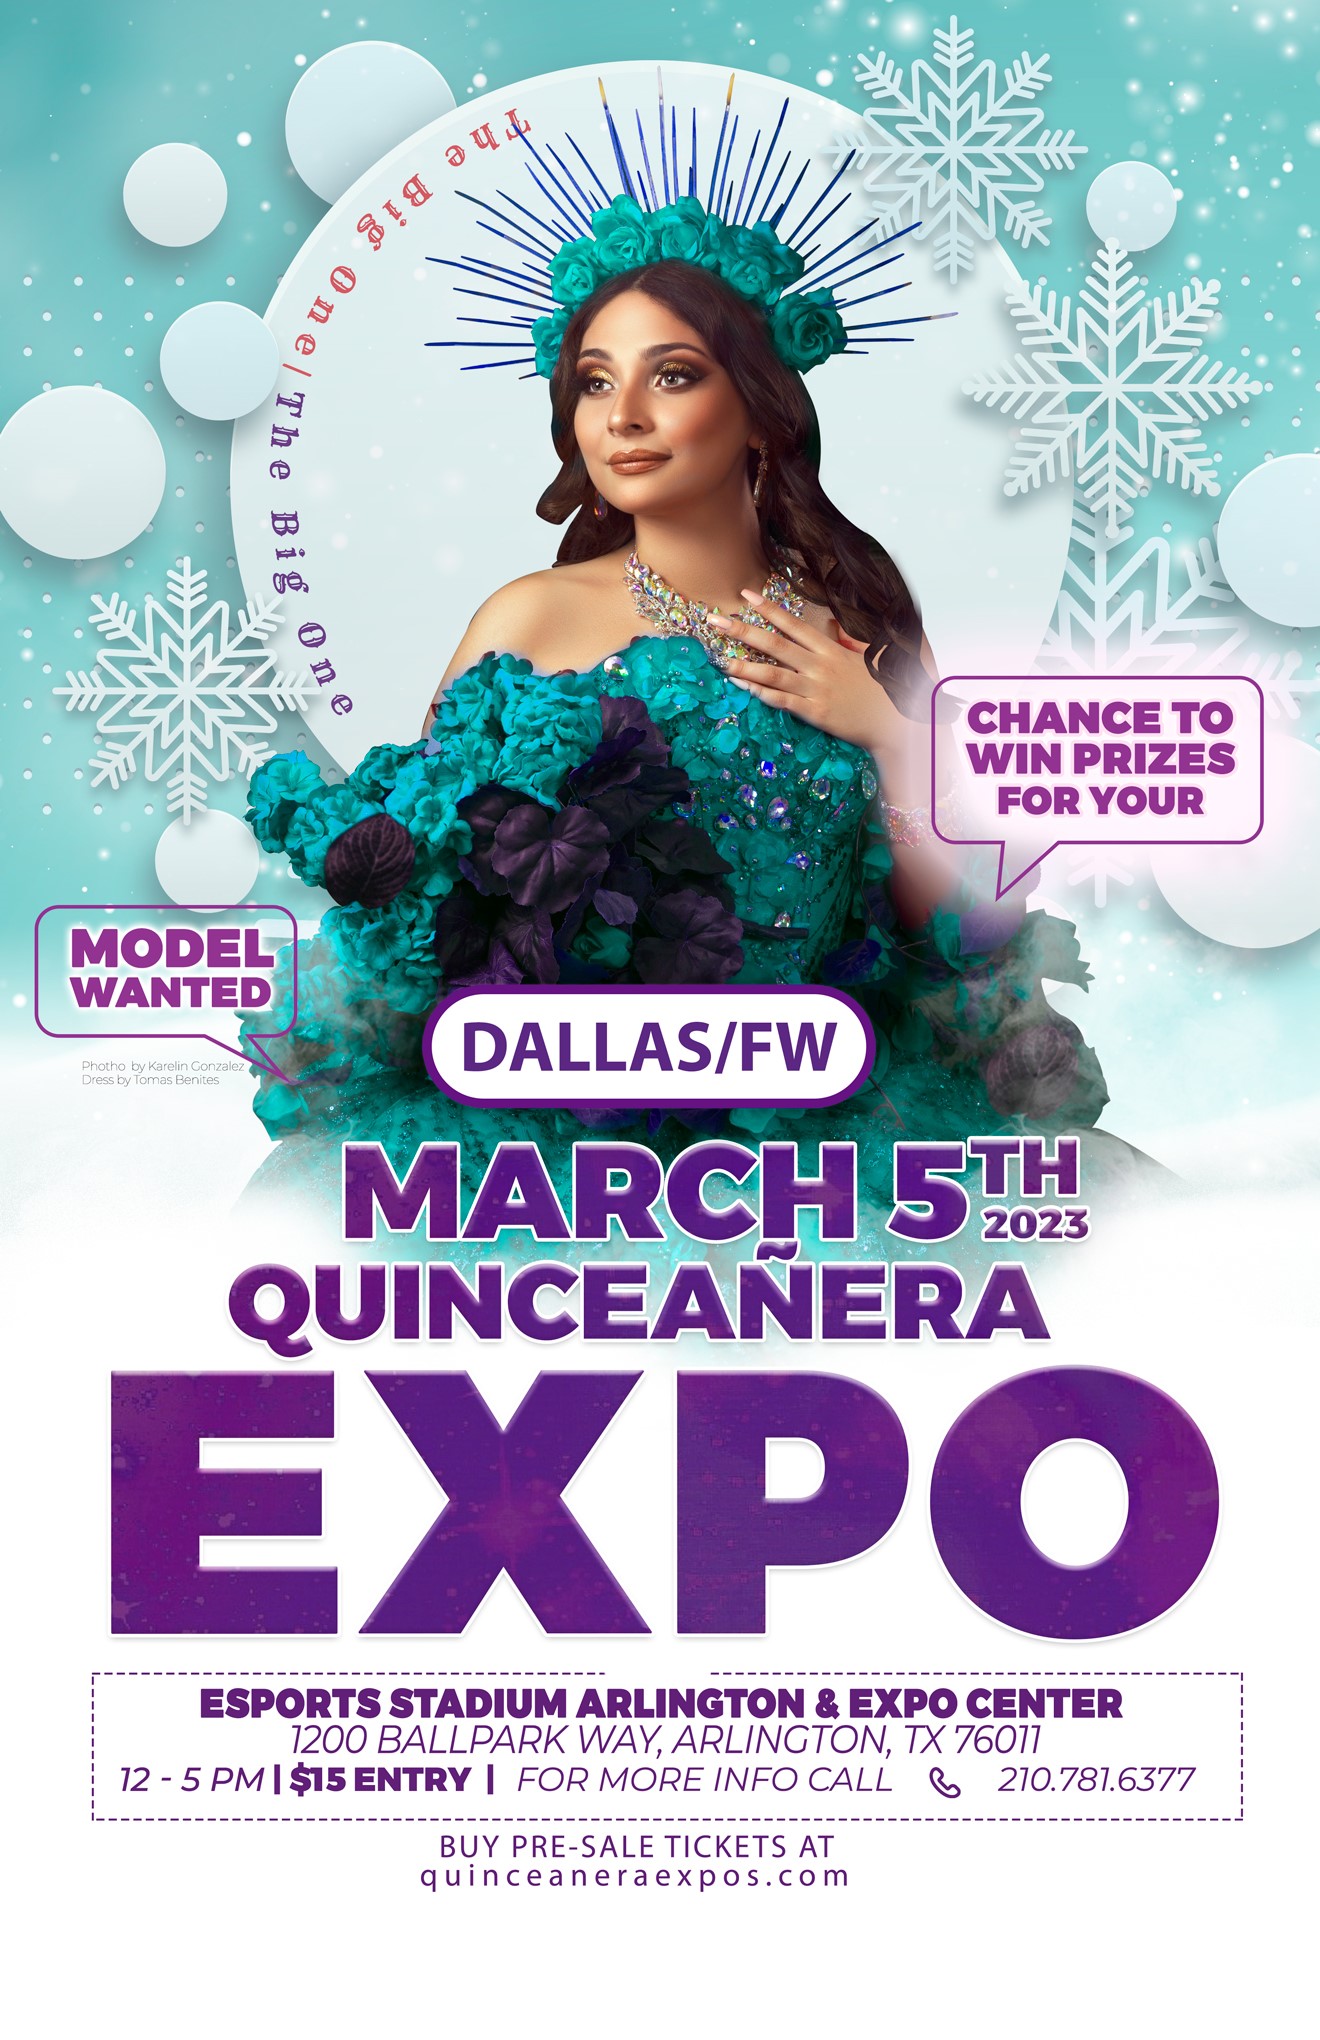 The Big One Dallas Quinceanera Expo 03/05/2023 Arlington Expo Center  on mar. 05, 11:30@Esports Stadium Arlington & Expo Center - Buy tickets and Get information on Quinceanera Expo 